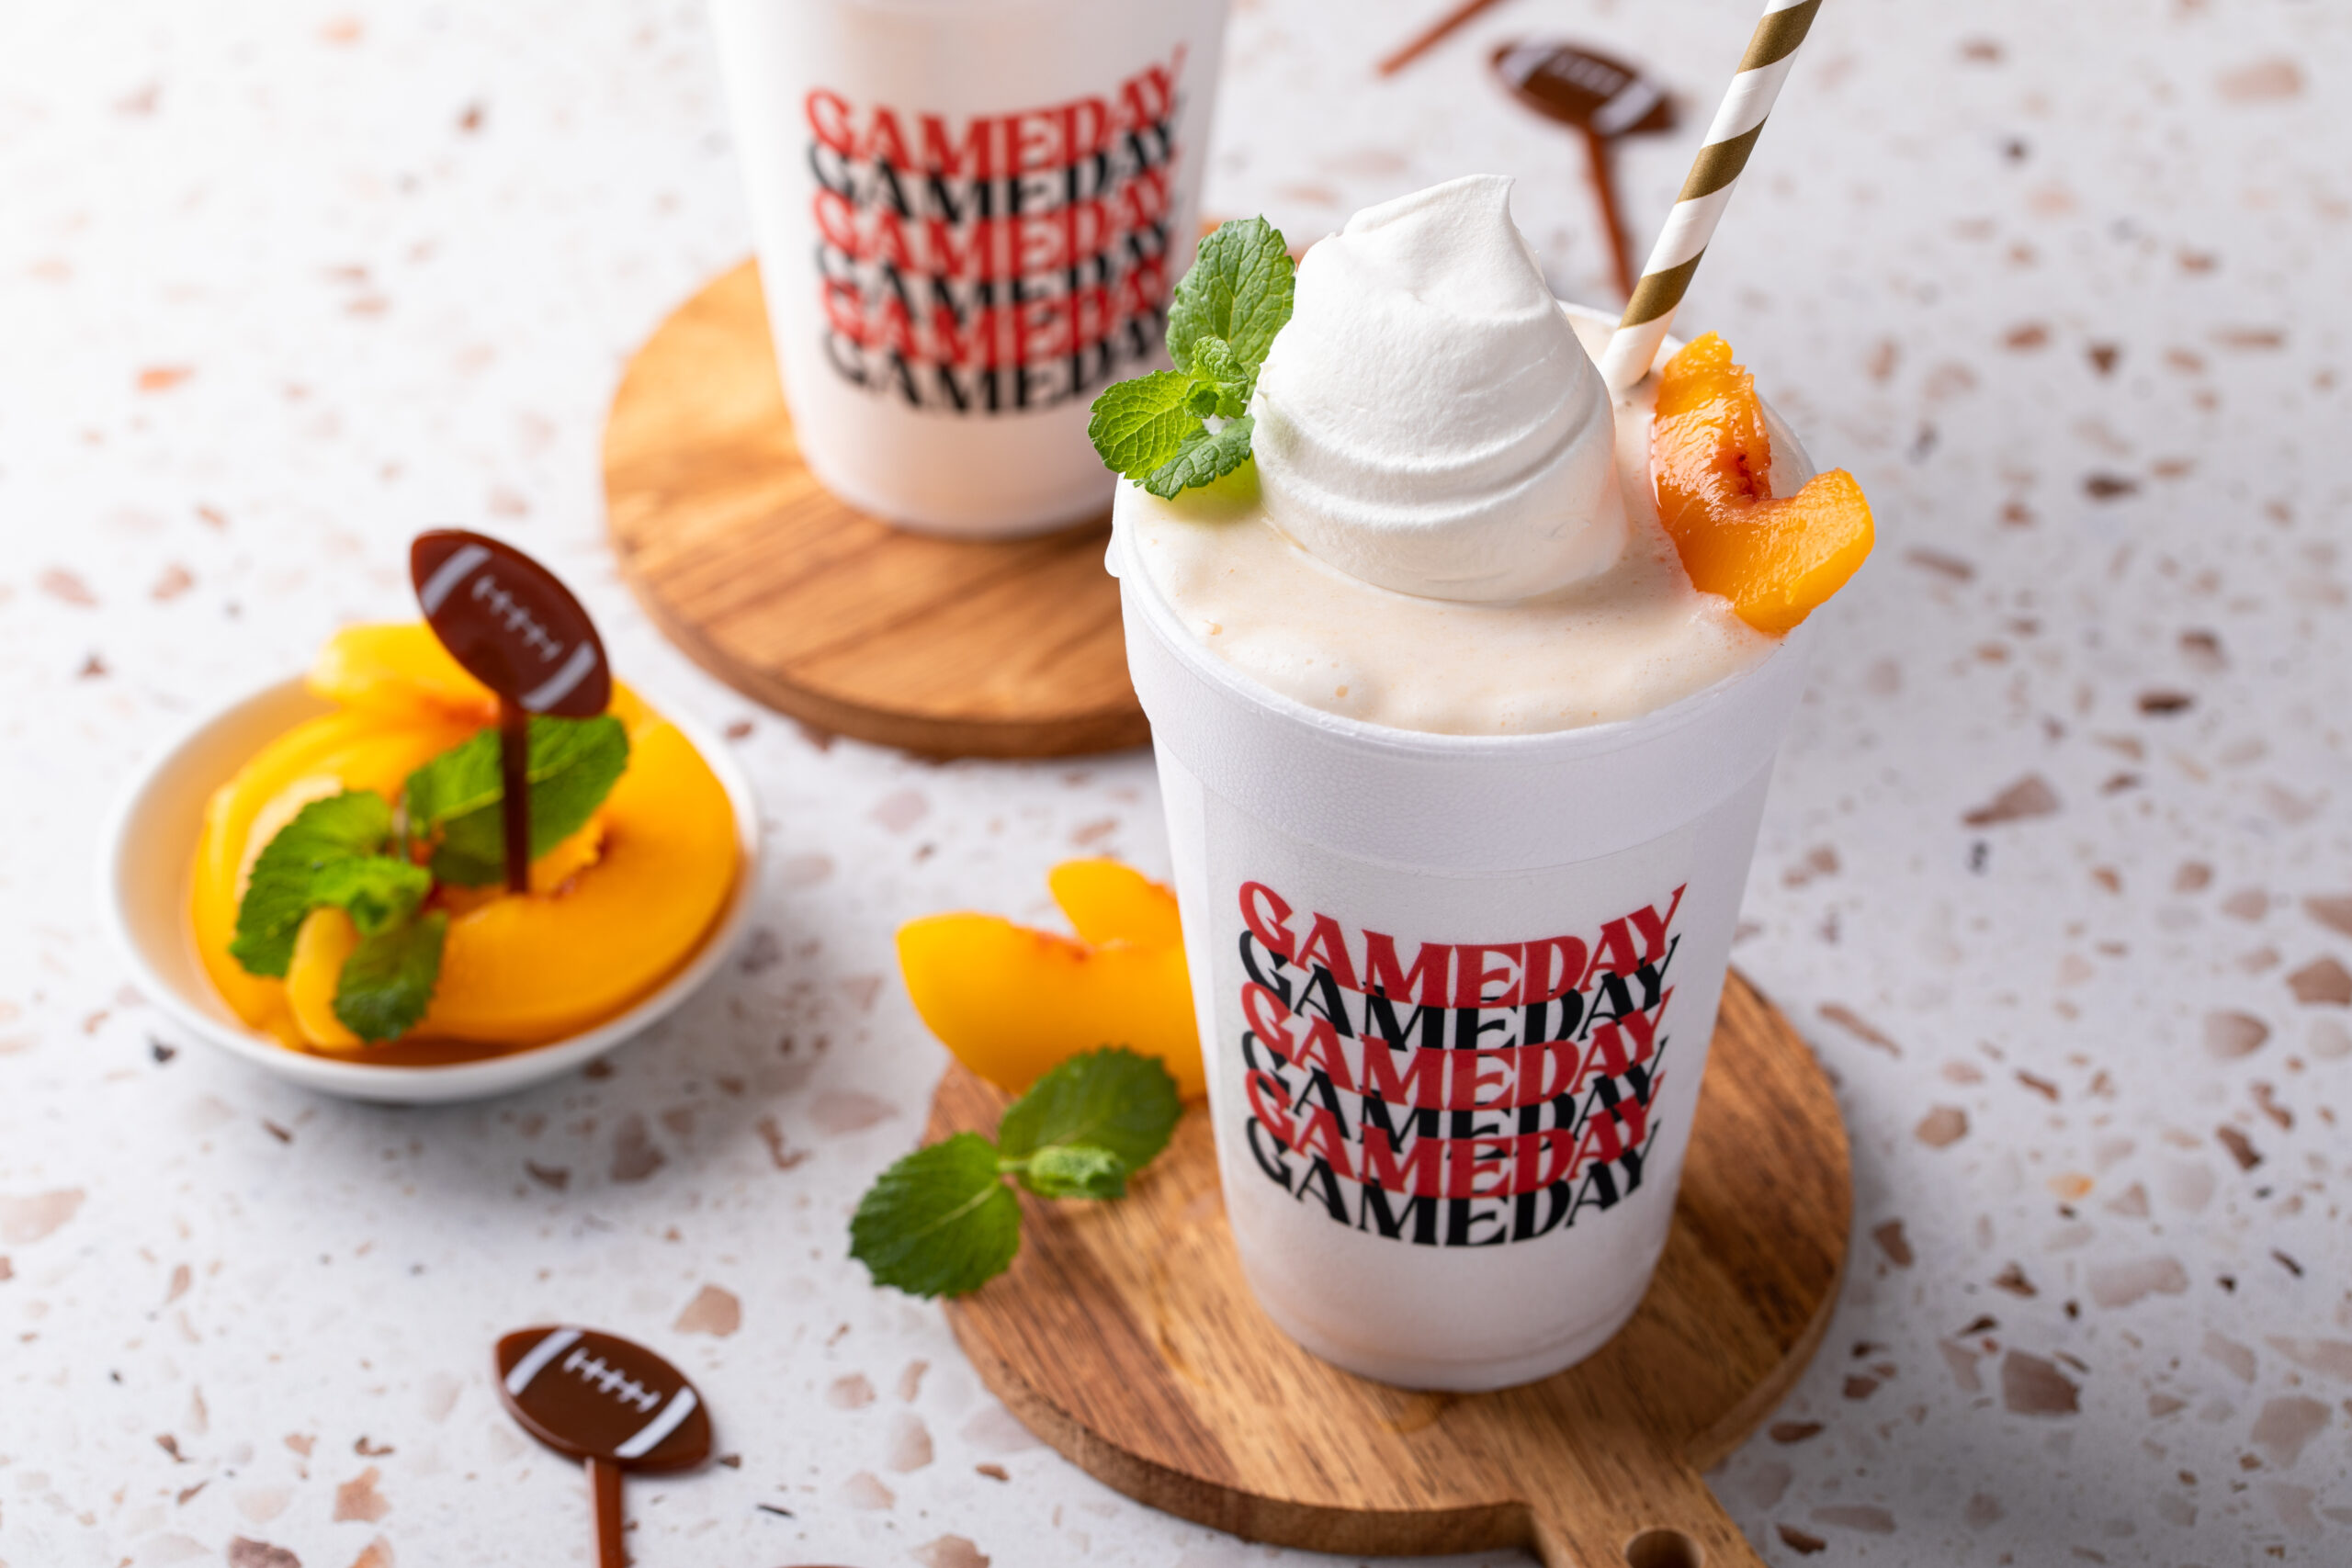 Looking for the perfect game day companion? Click here to try the most amazing Spiked Peach Milkshake EVER!